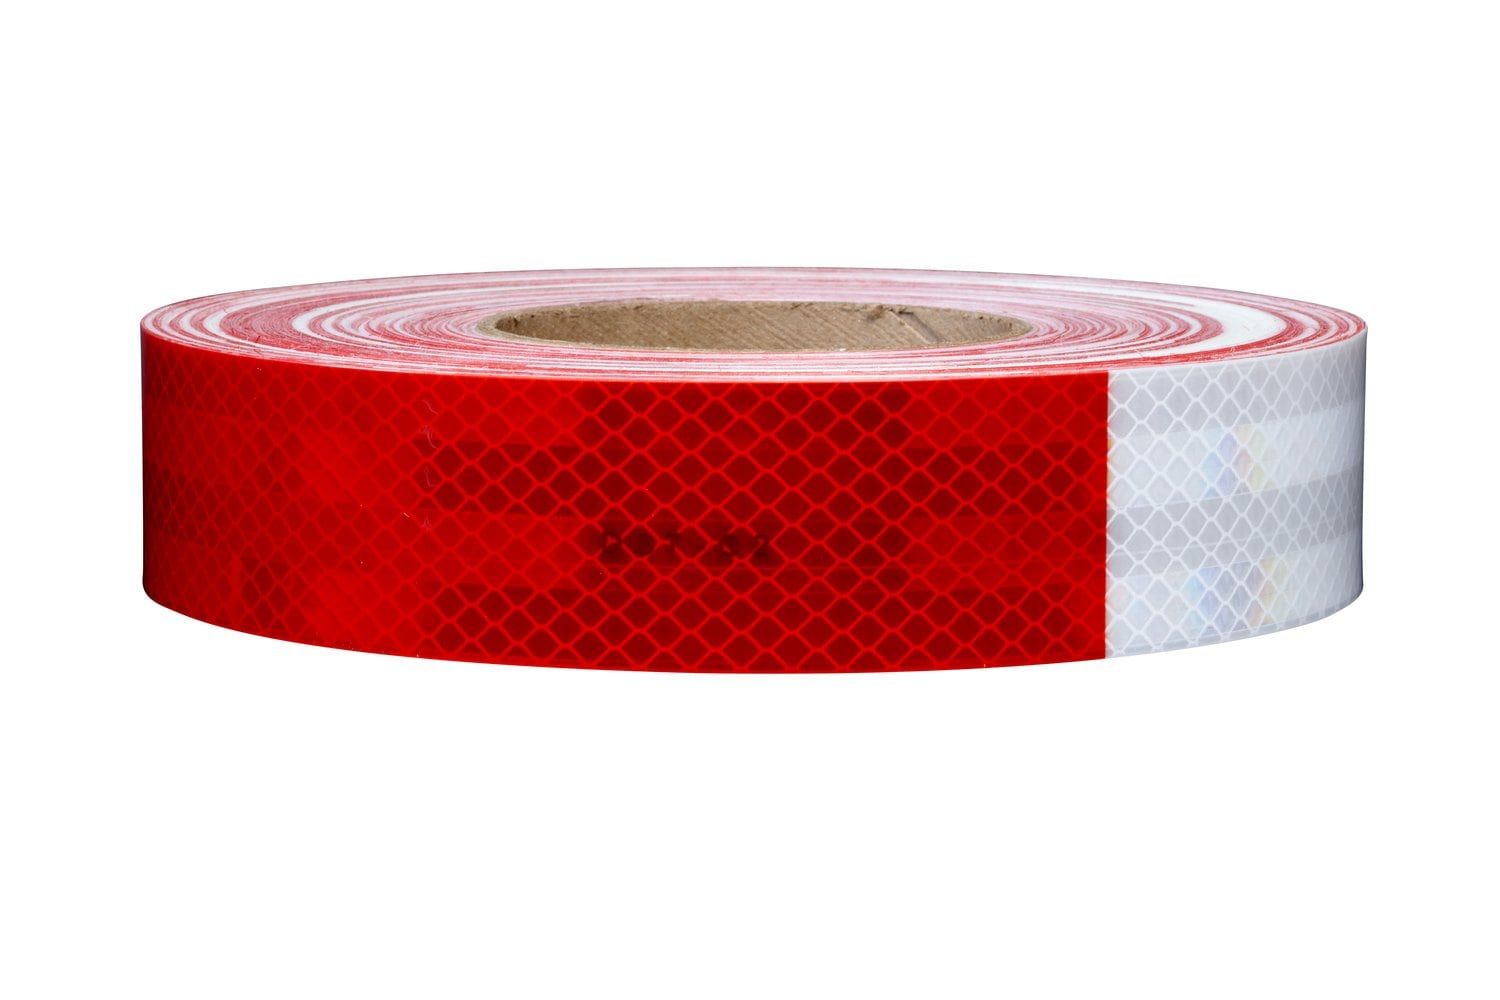 7100008258 - 3M Diamond Grade Conspicuity Markings 983-32NL, Red/White, Roll
Configurable